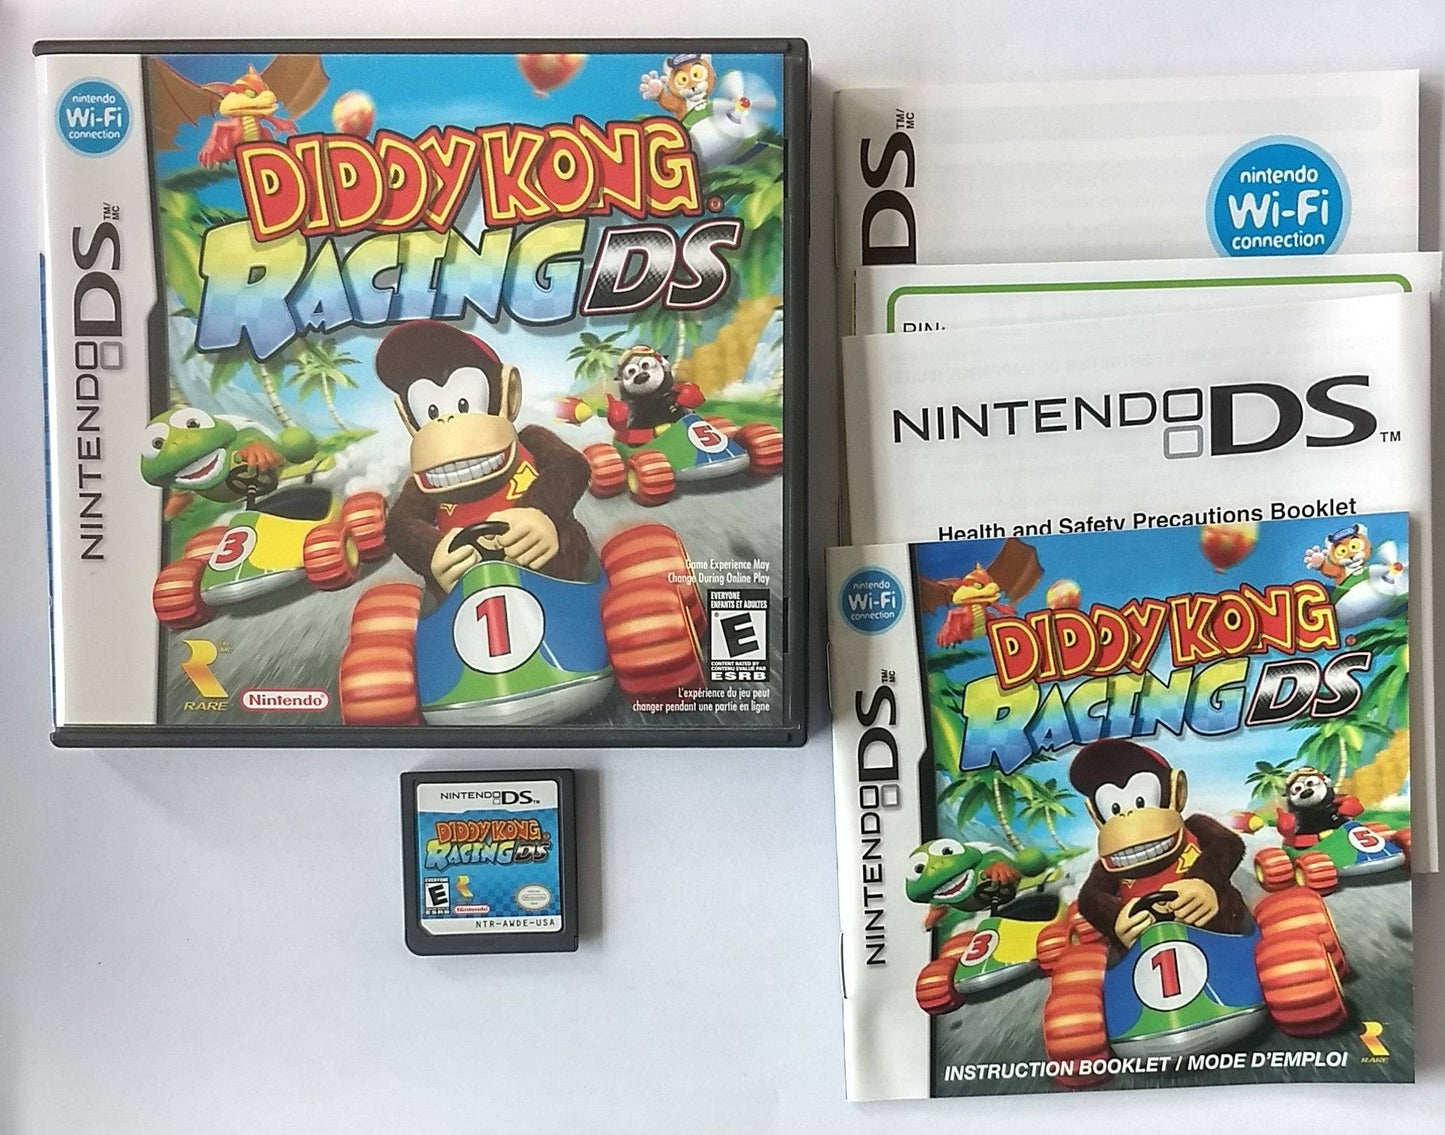 DIDDY KONG RACING DS (NINTENDO DS) - jeux video game-x